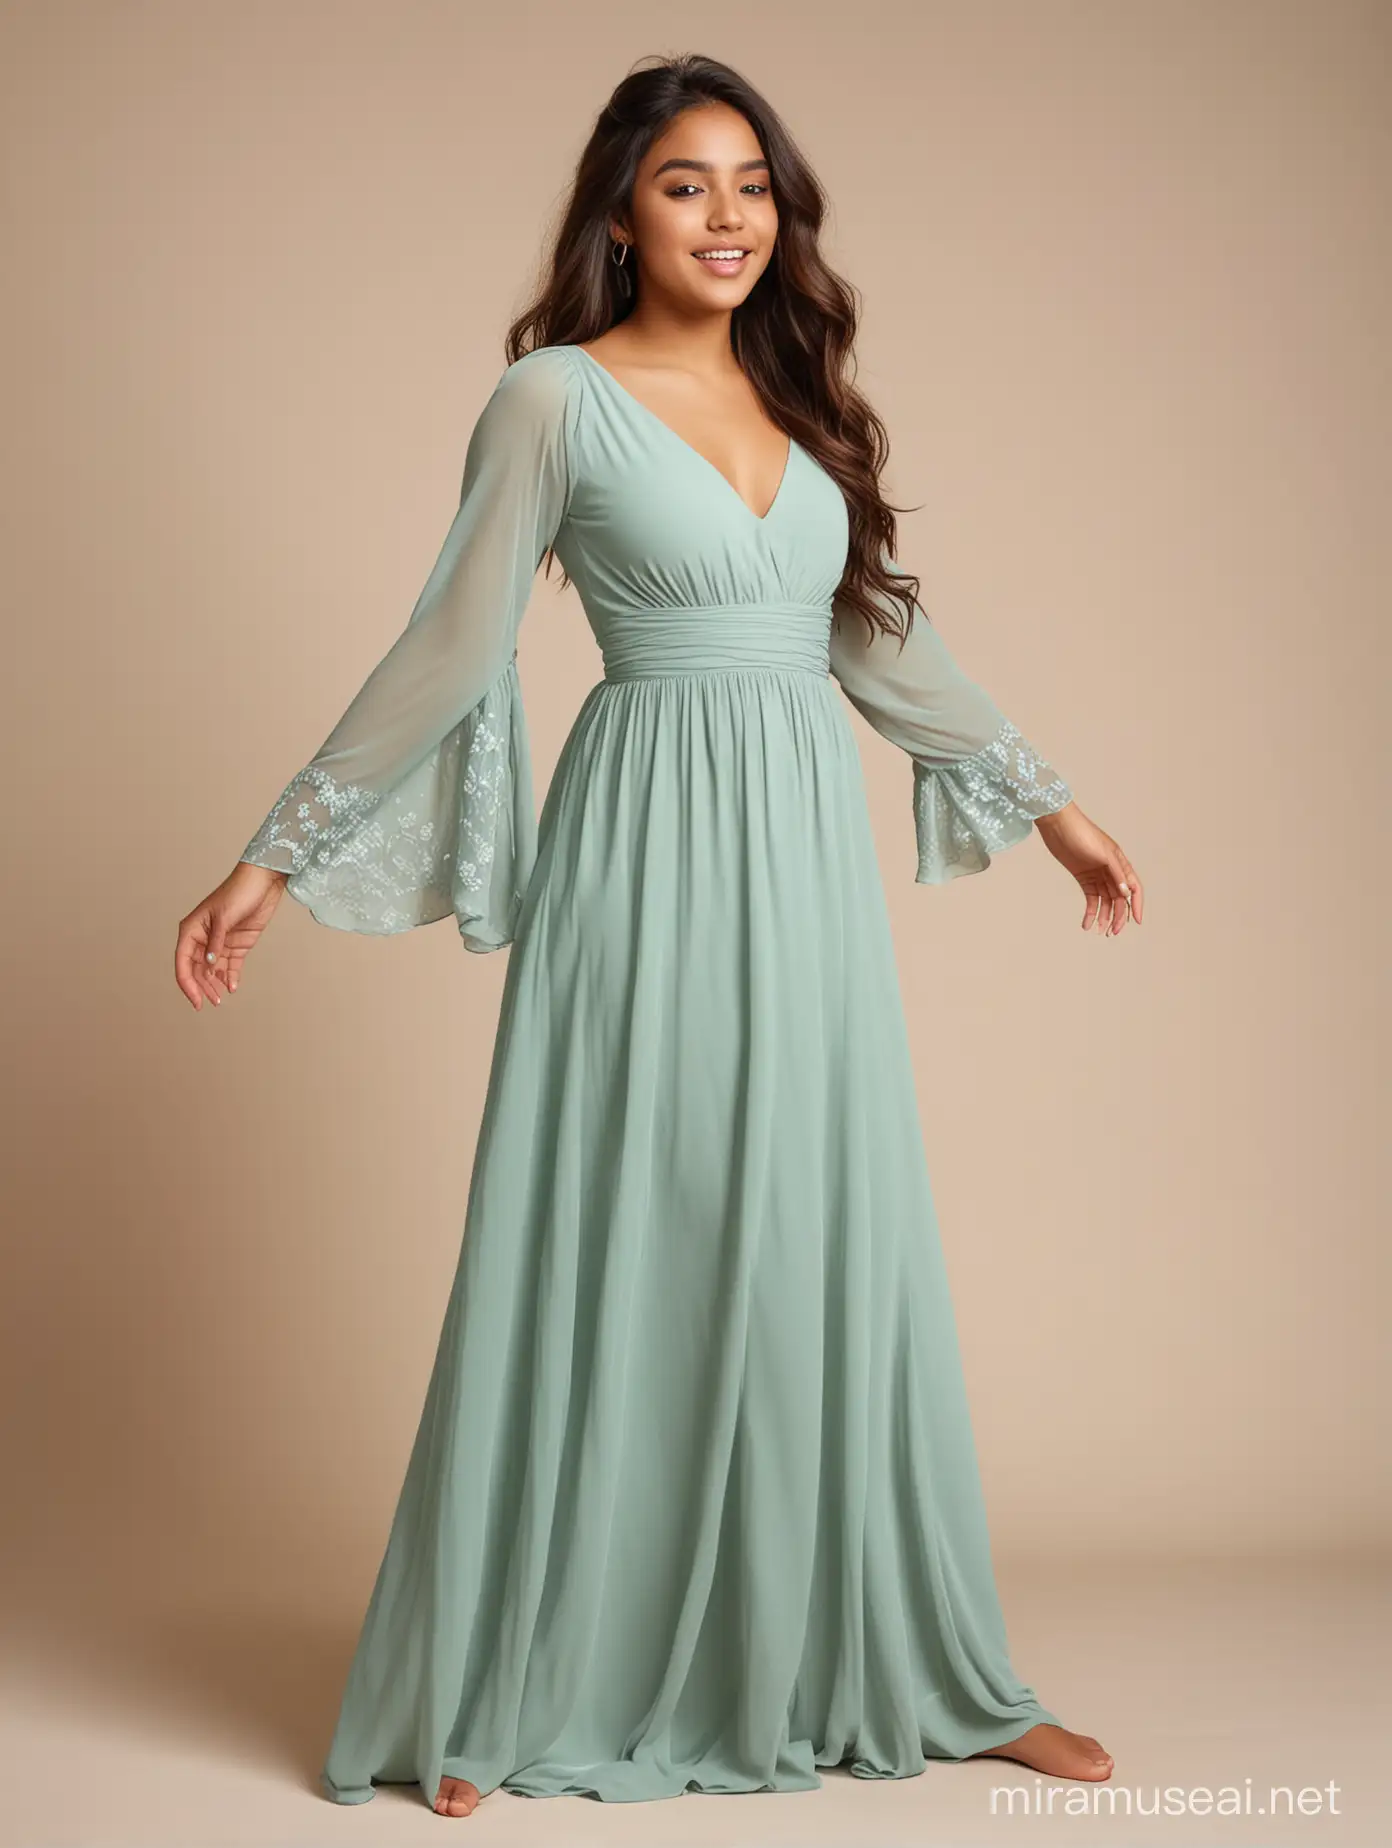 Beautiful Latina teenage Bridesmaid woman with makeup and long hair wearing an ankle length dress with very long flowy sleeves barefoot. plain background. Putting both her hands on her stomach.